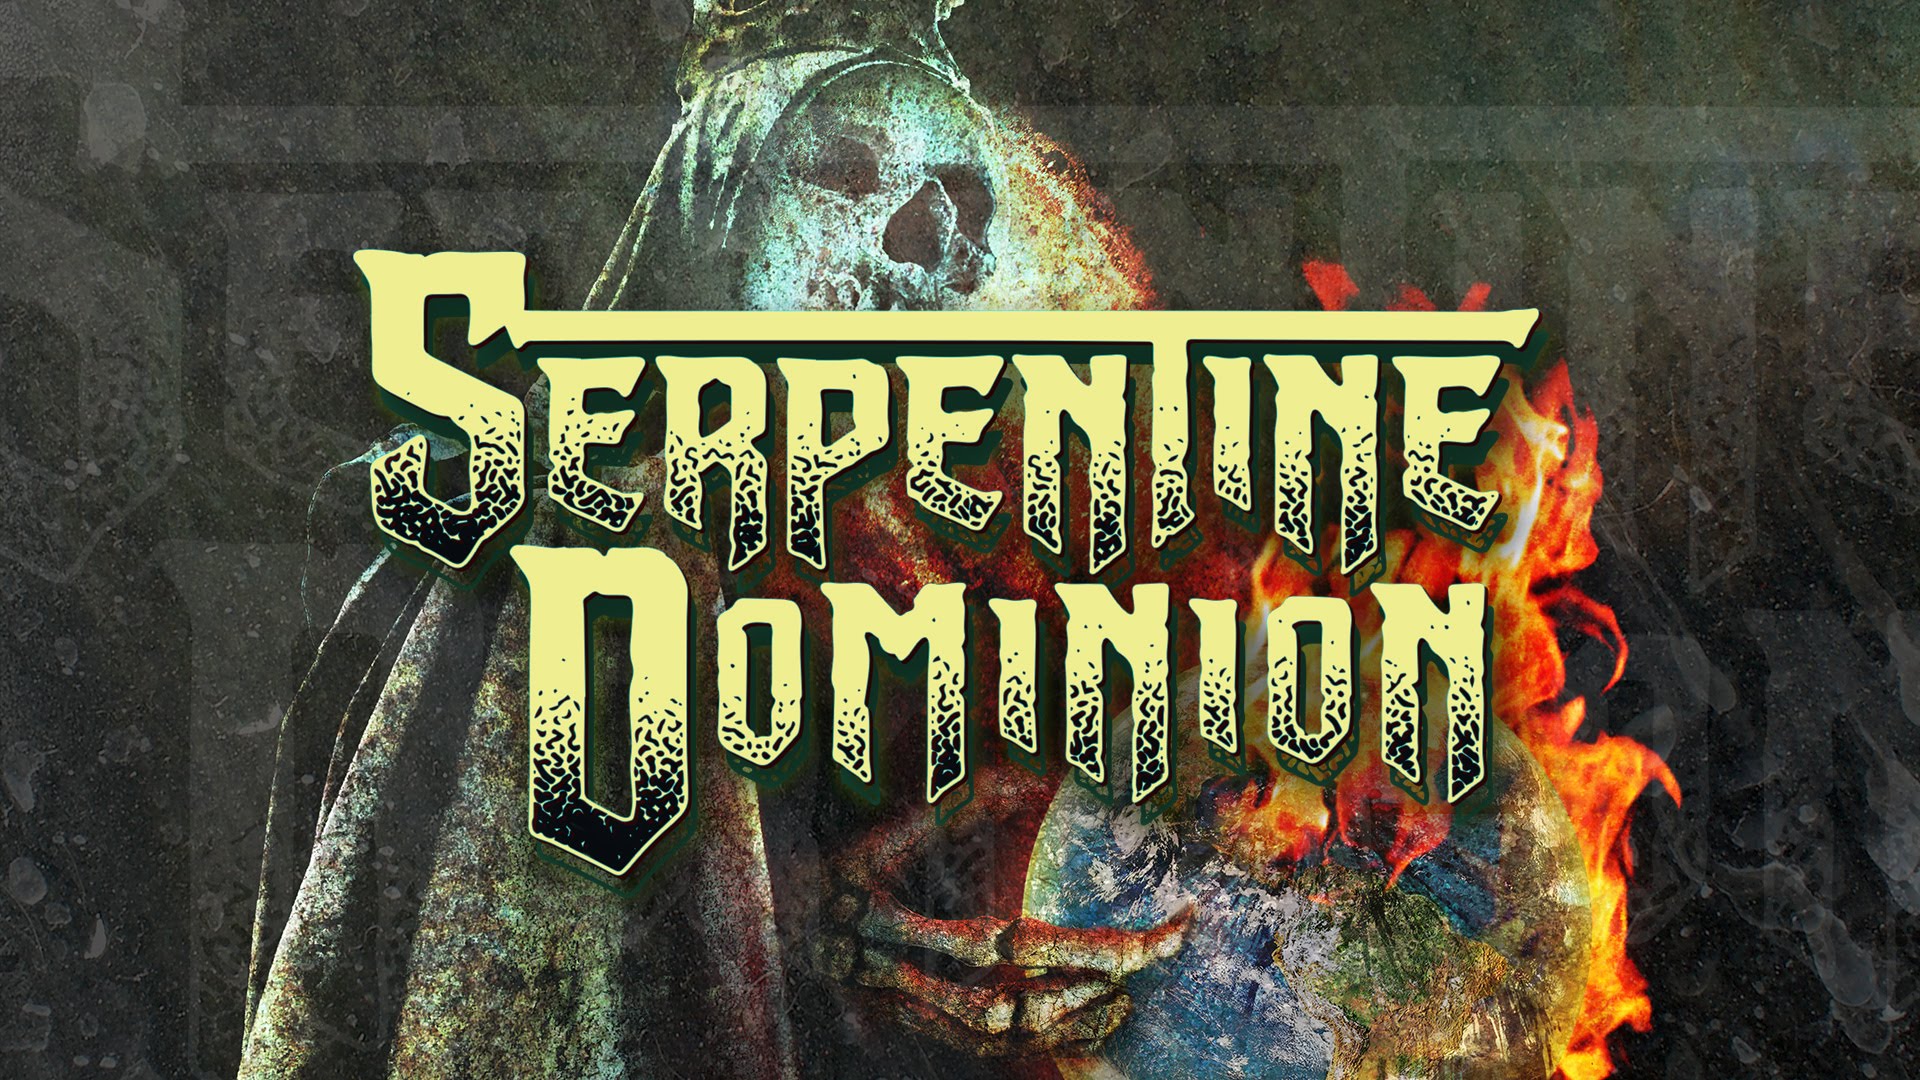 Serpentine Dominion -Killswitch Engage, Cannibal Corpse-